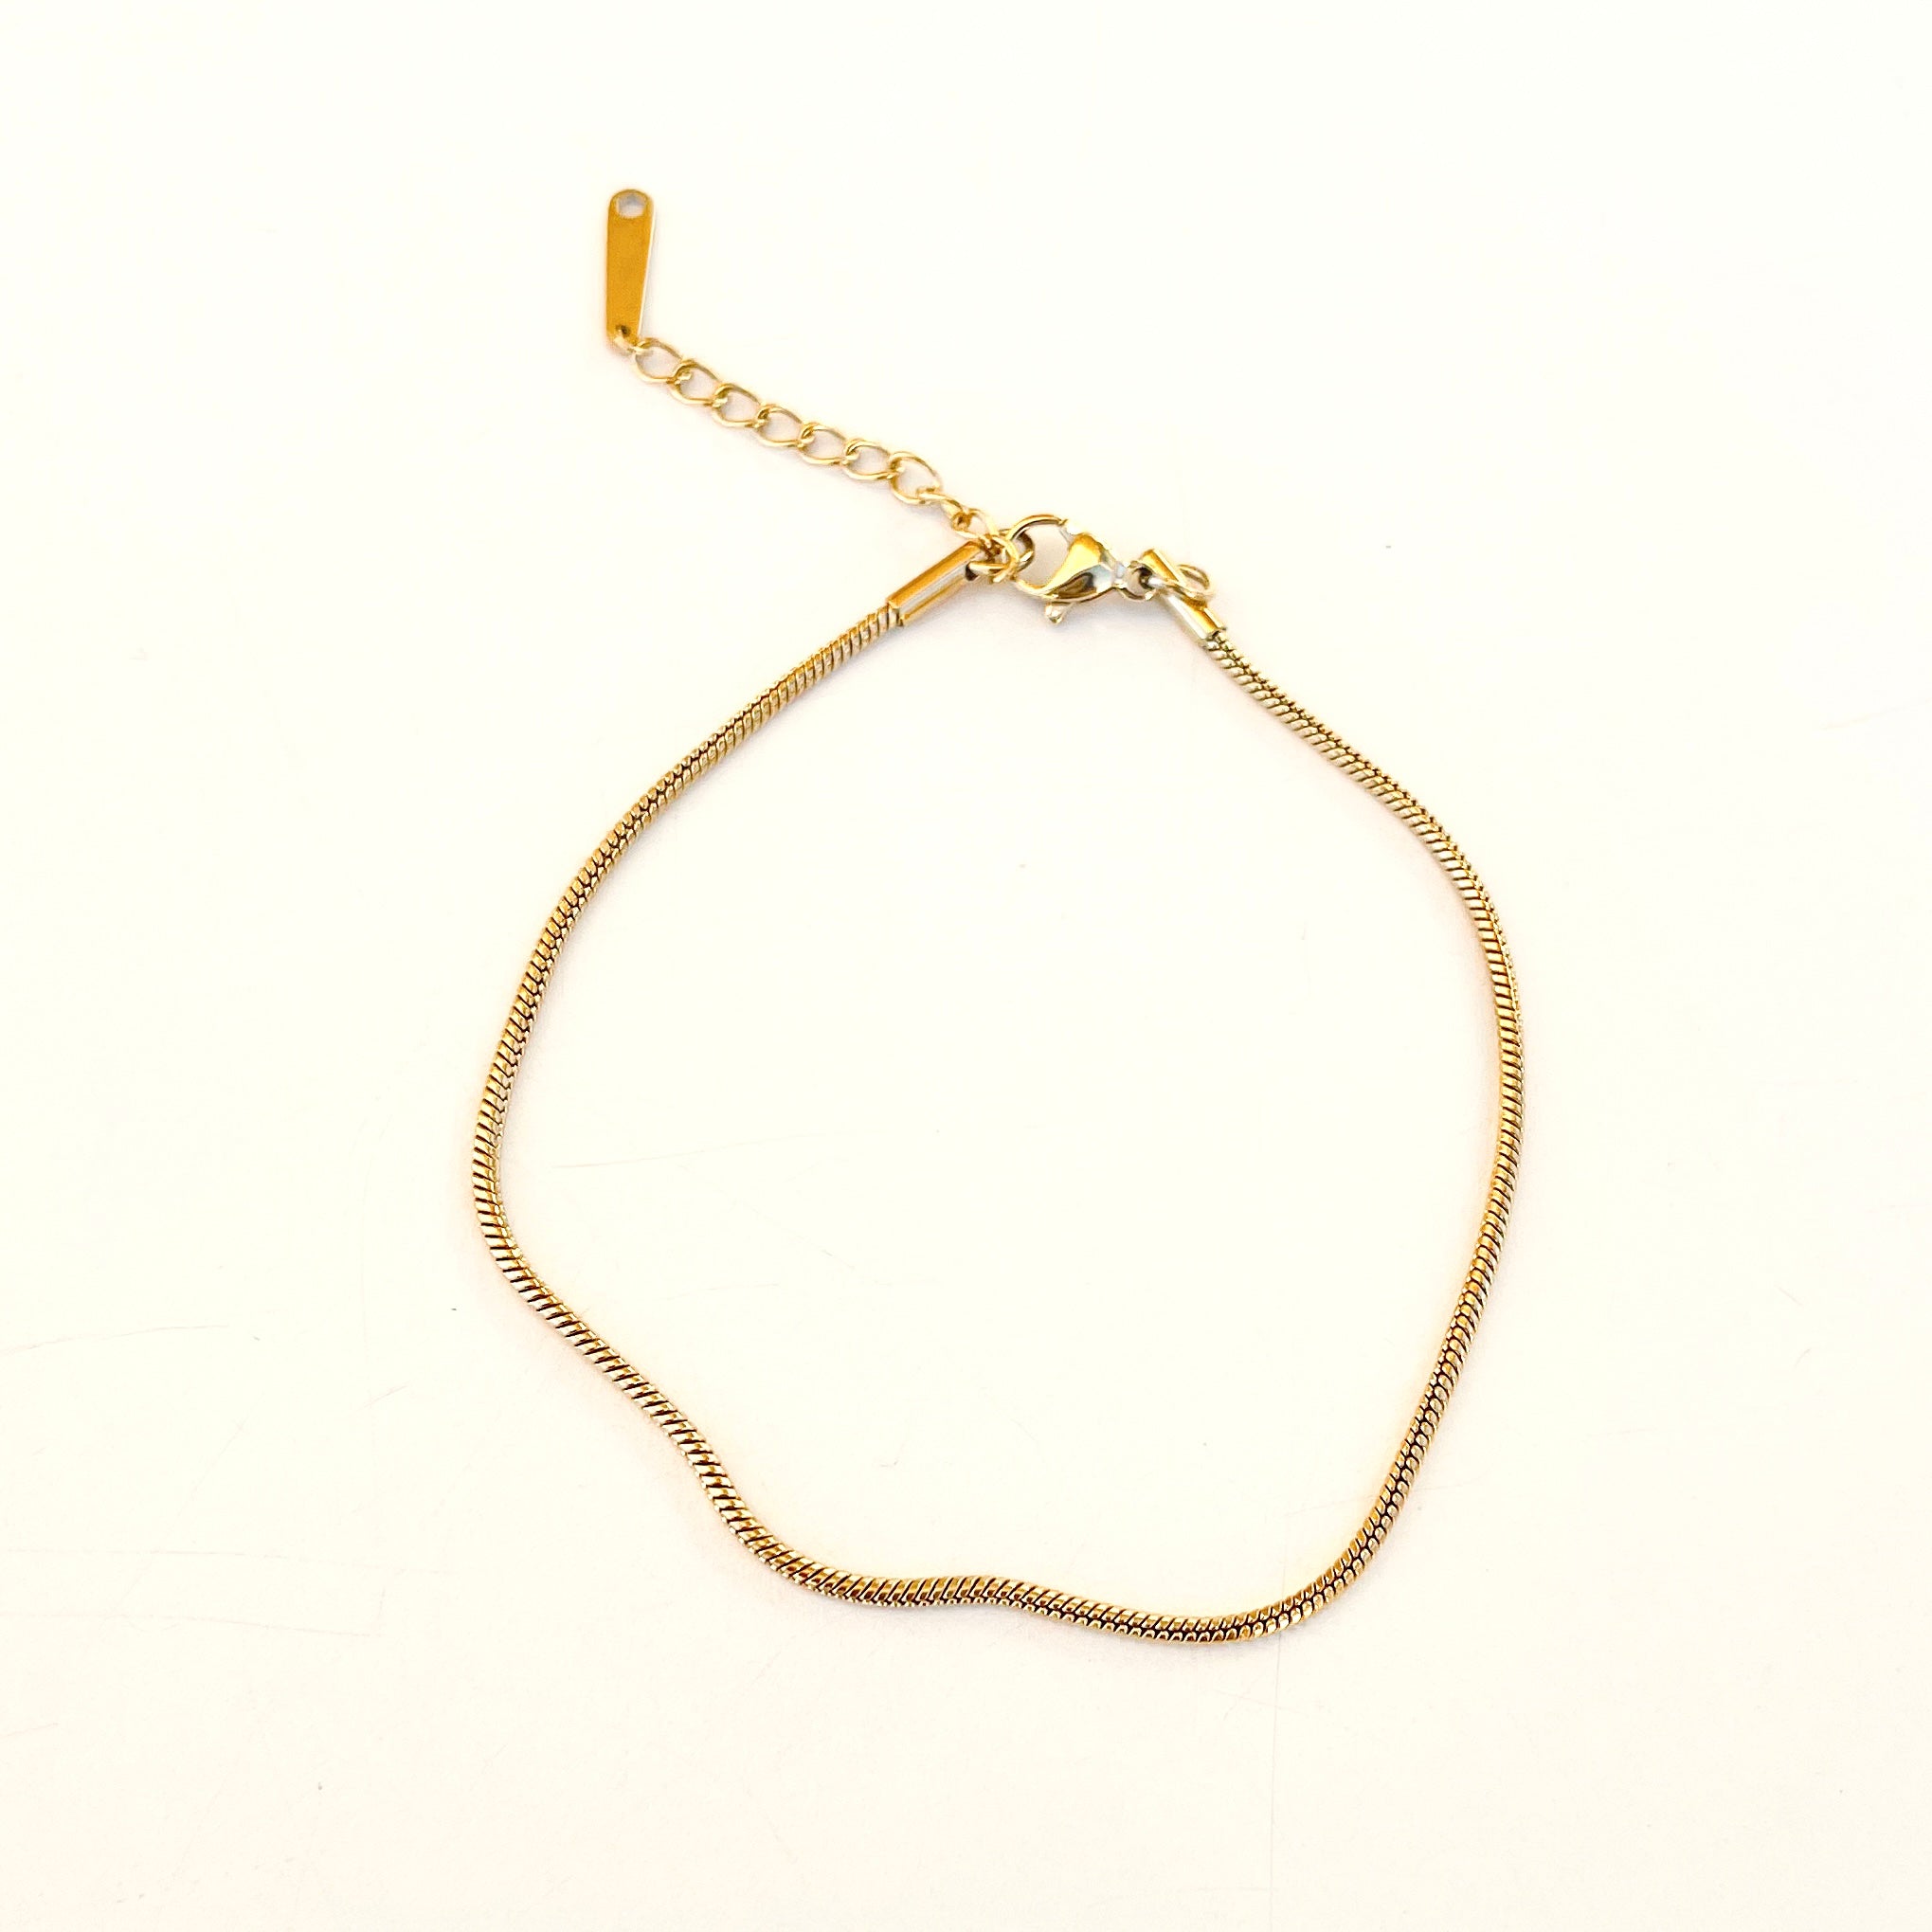 Rope Chain Anklet in Gold - Stainless Steel